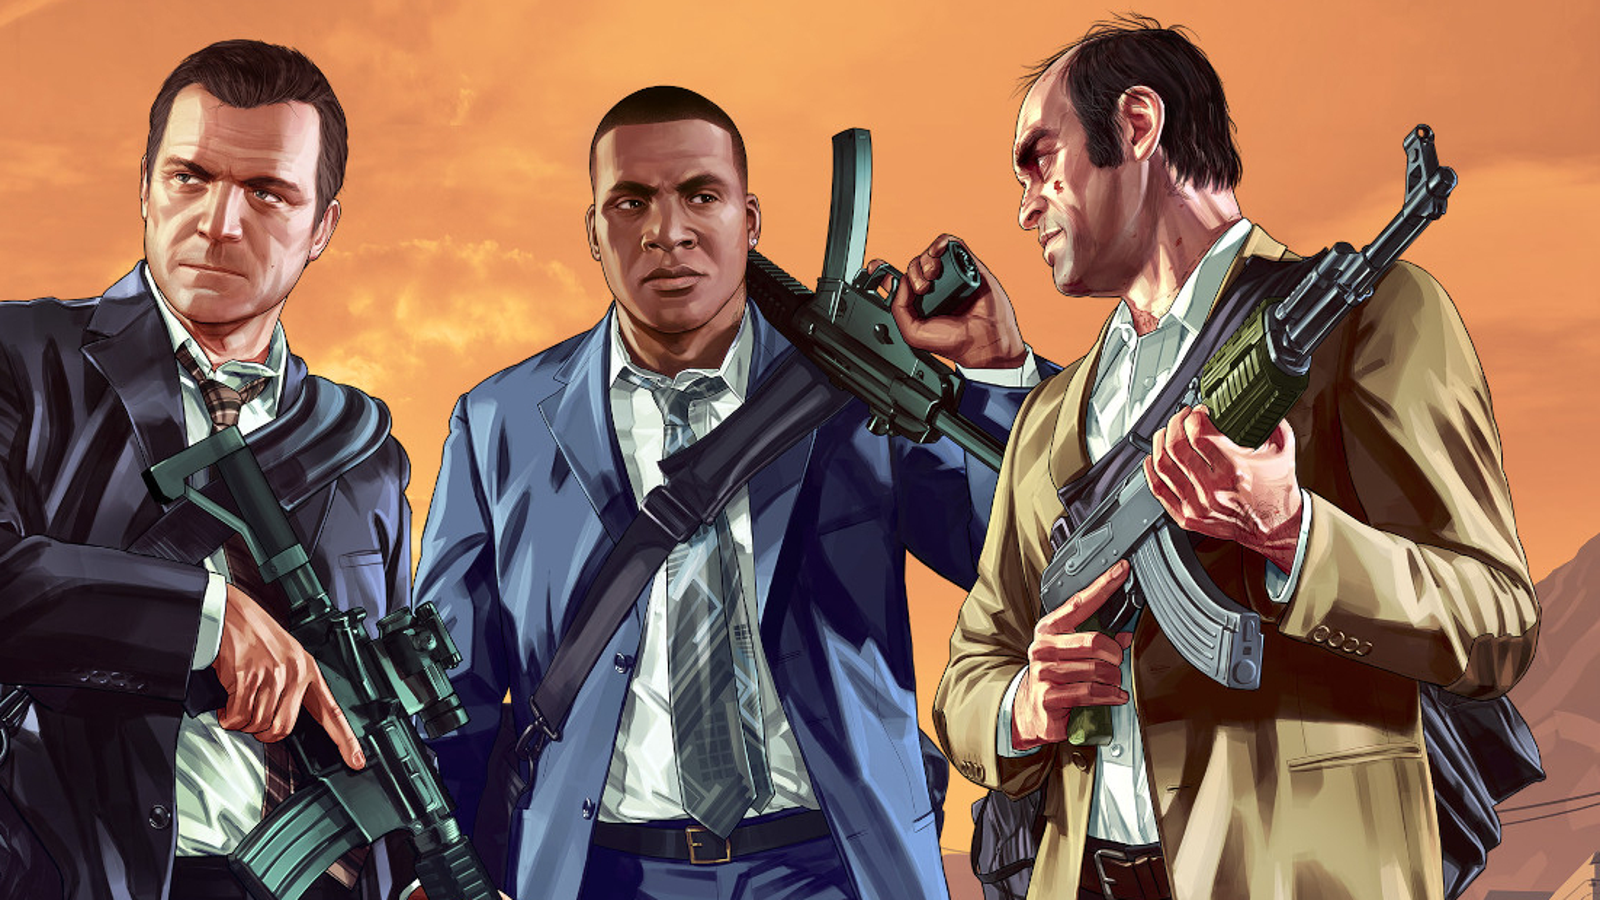 Grand Theft Auto 5 half price for first three months on PS5, Xbox